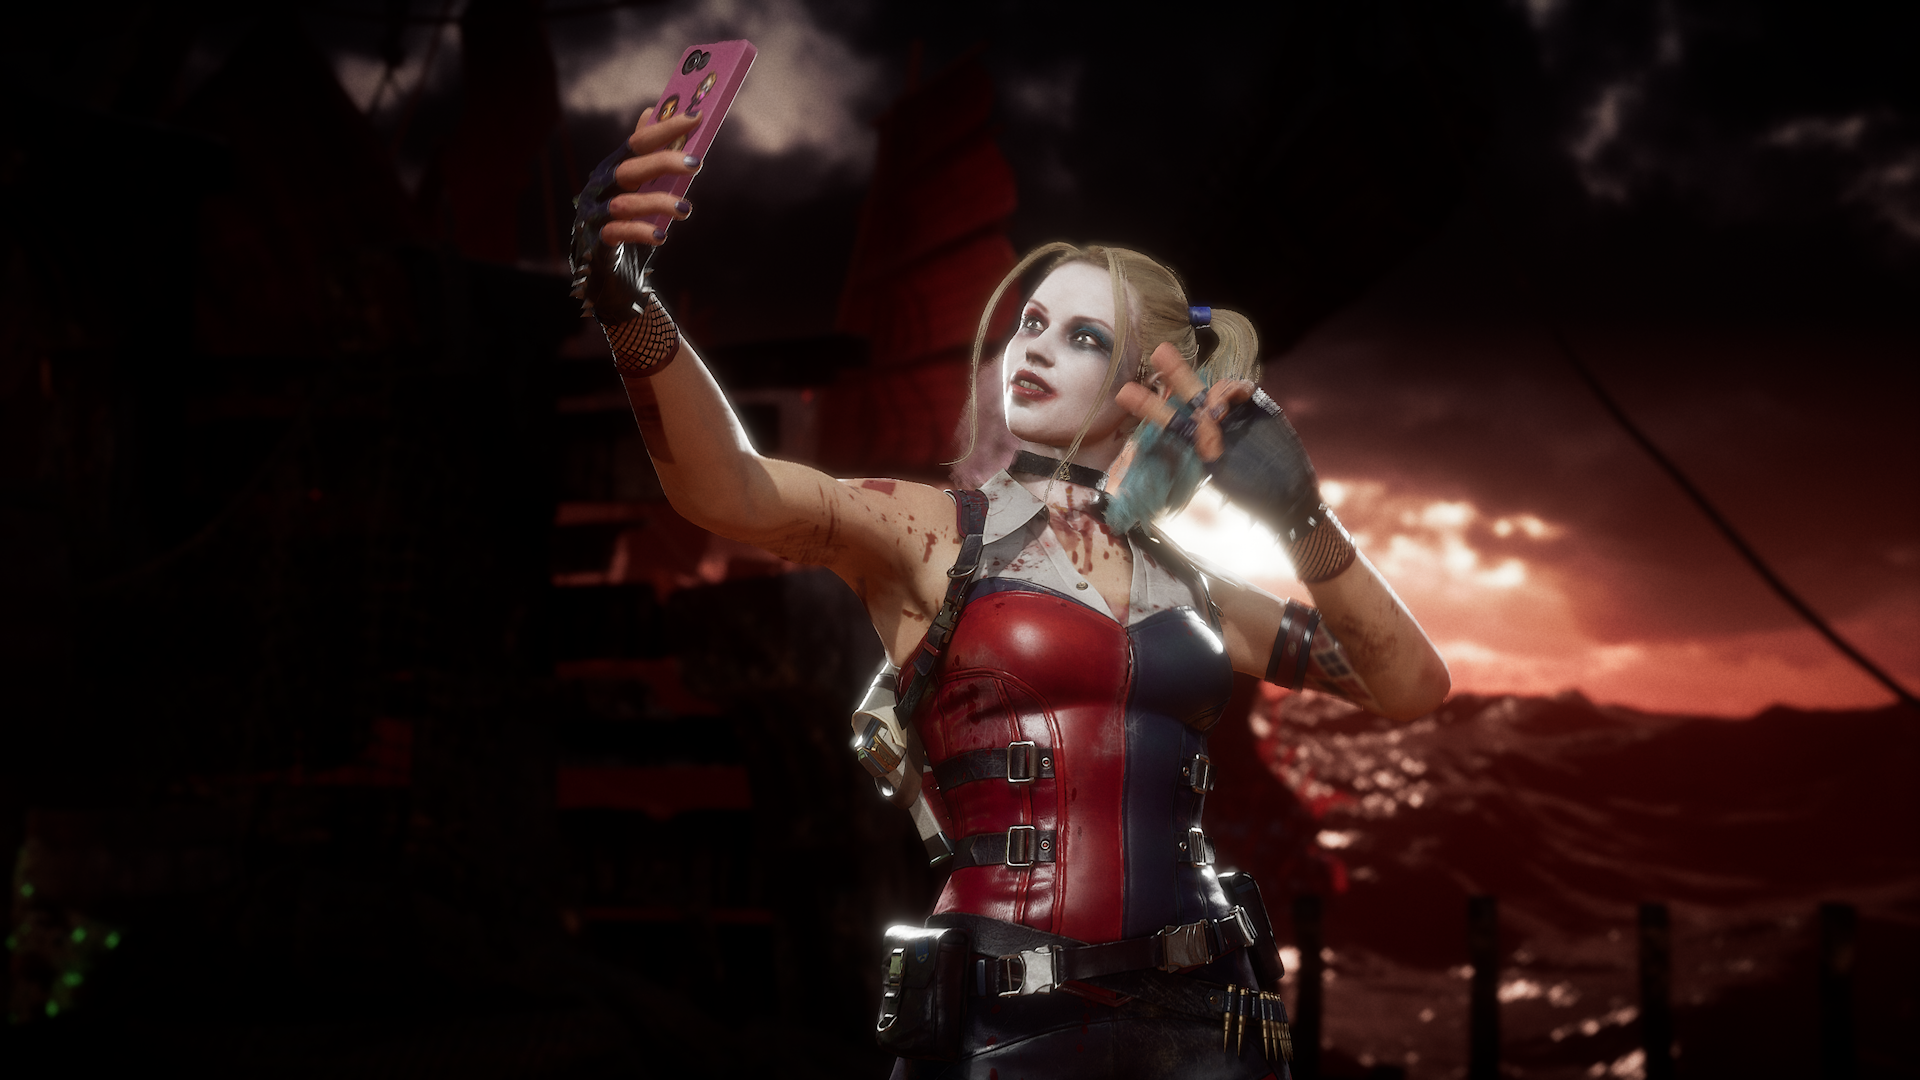 Mortal Kombat 11 Cassie Cage Harley Quinn Video Game Characters Video Game Girls Video Games Screen  1920x1080